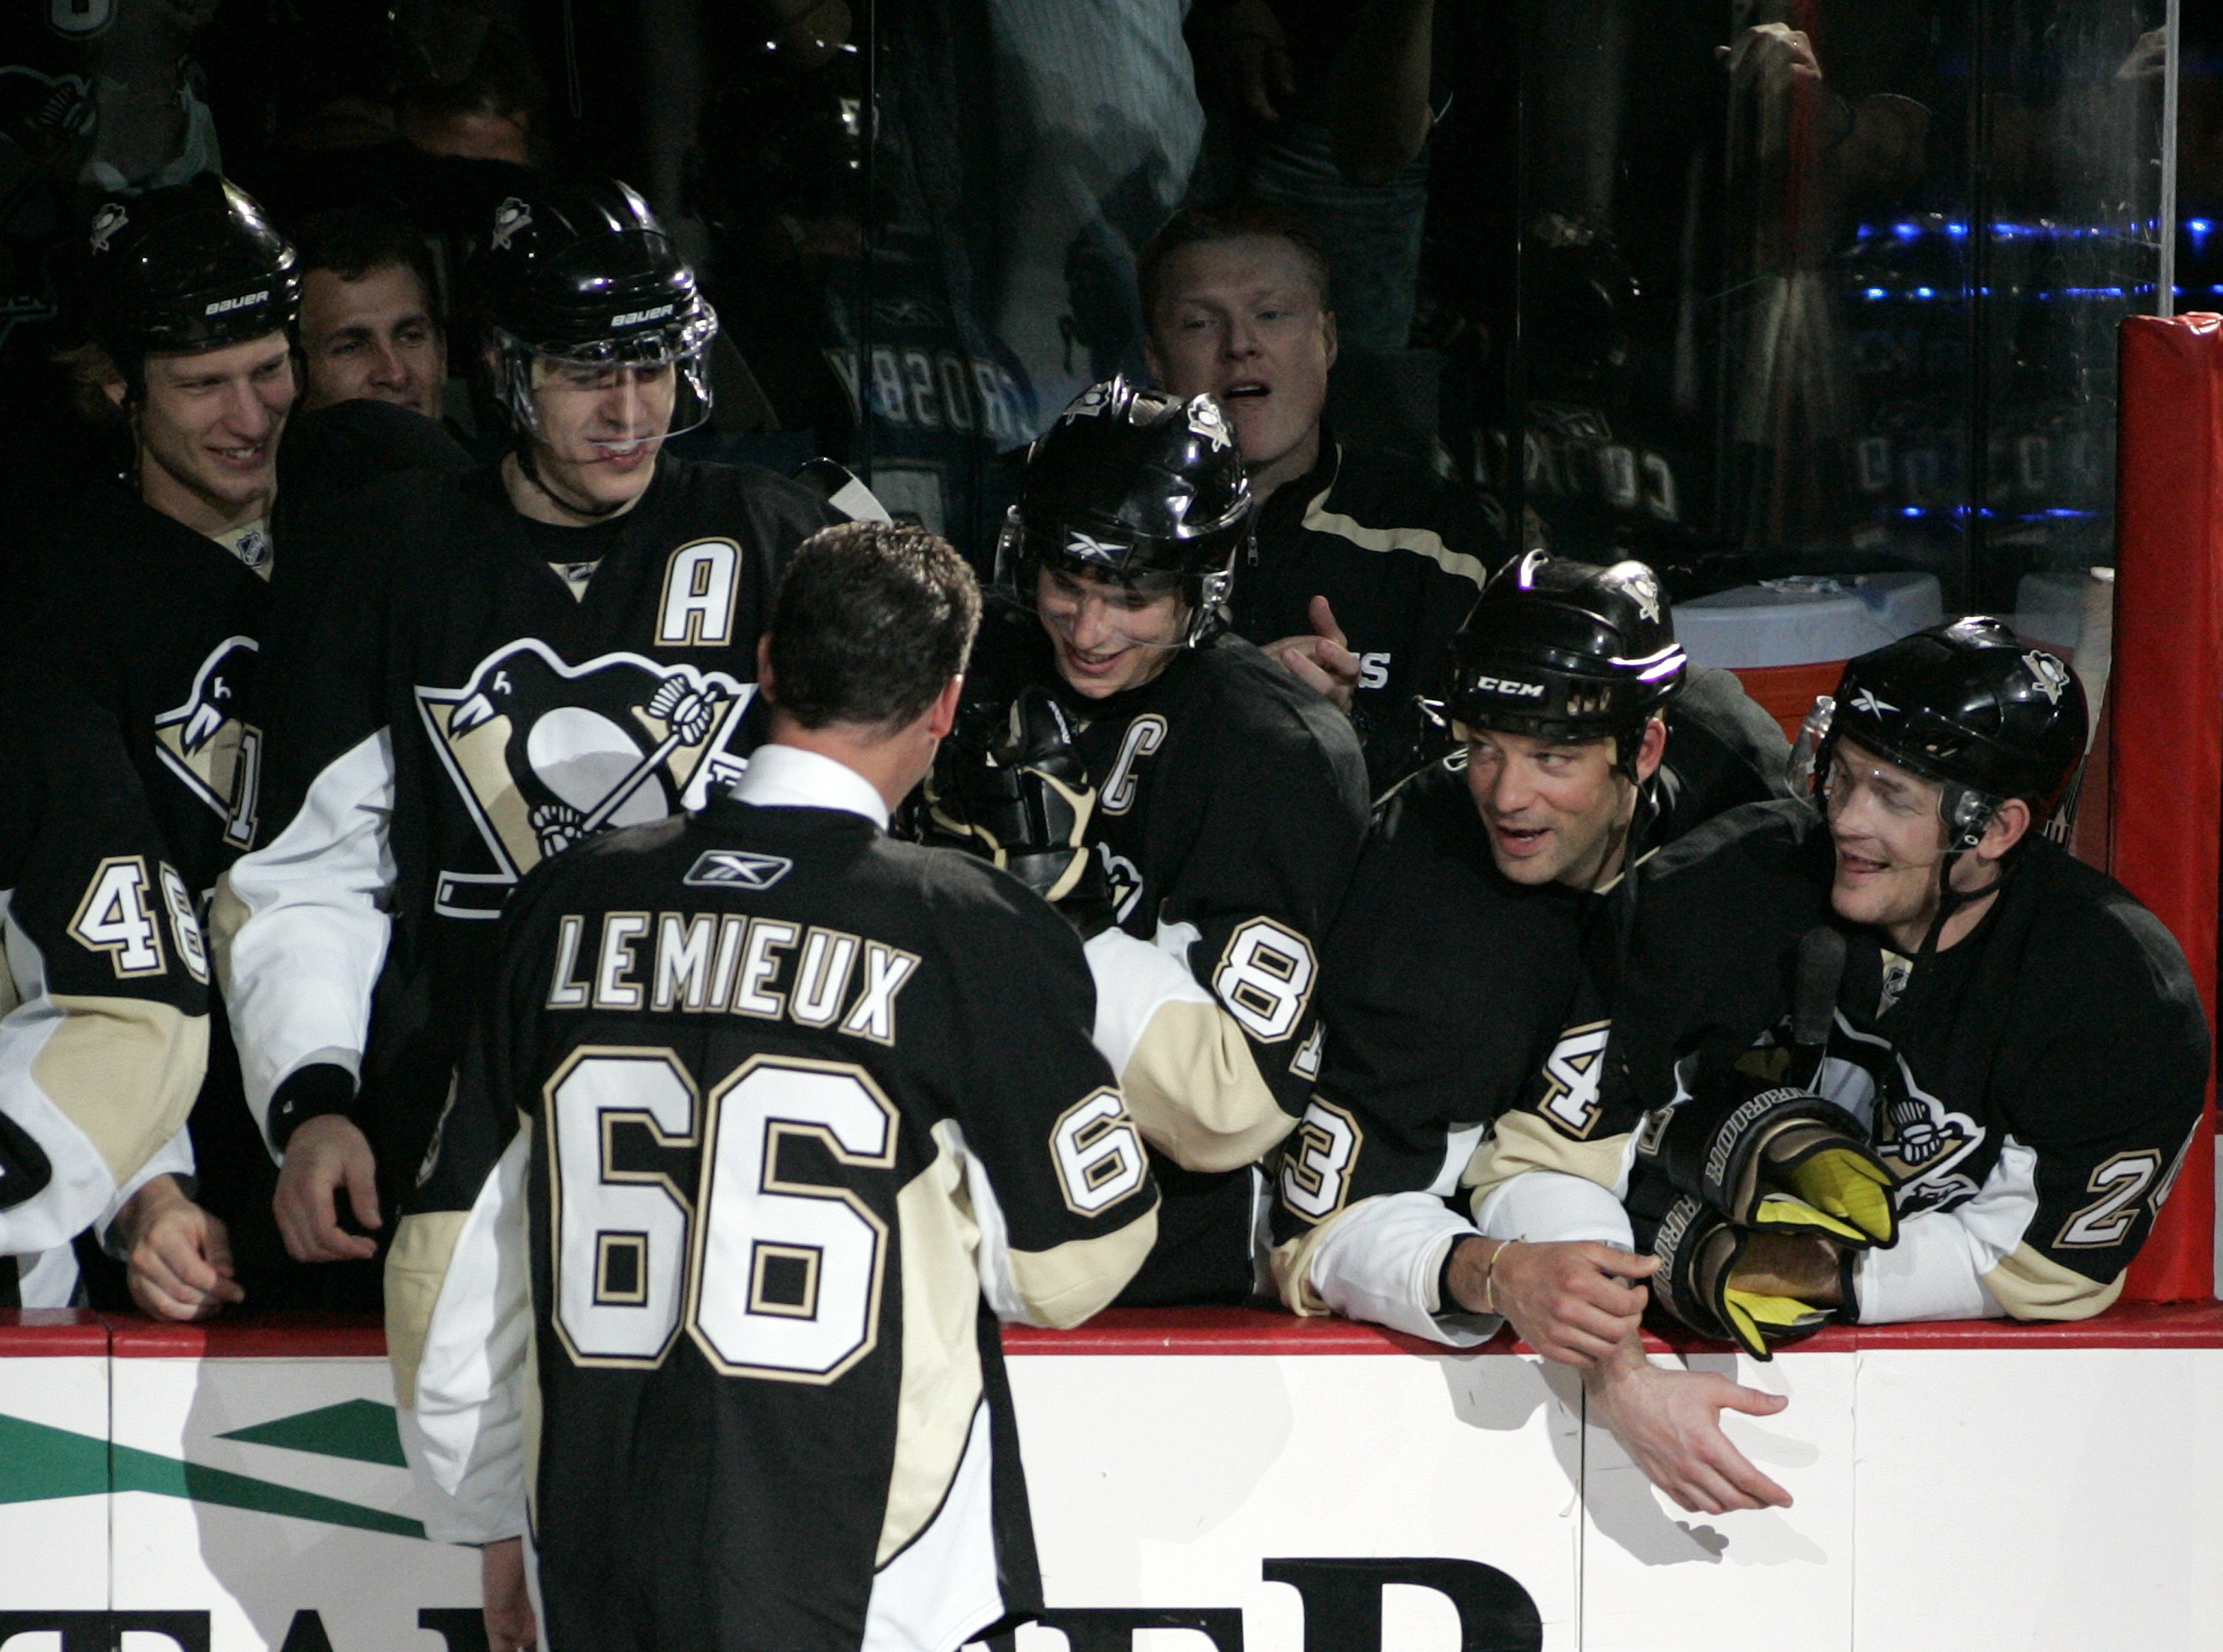 ON THIS DAY: October 5, 2005, Sidney Crosby plays his first NHL